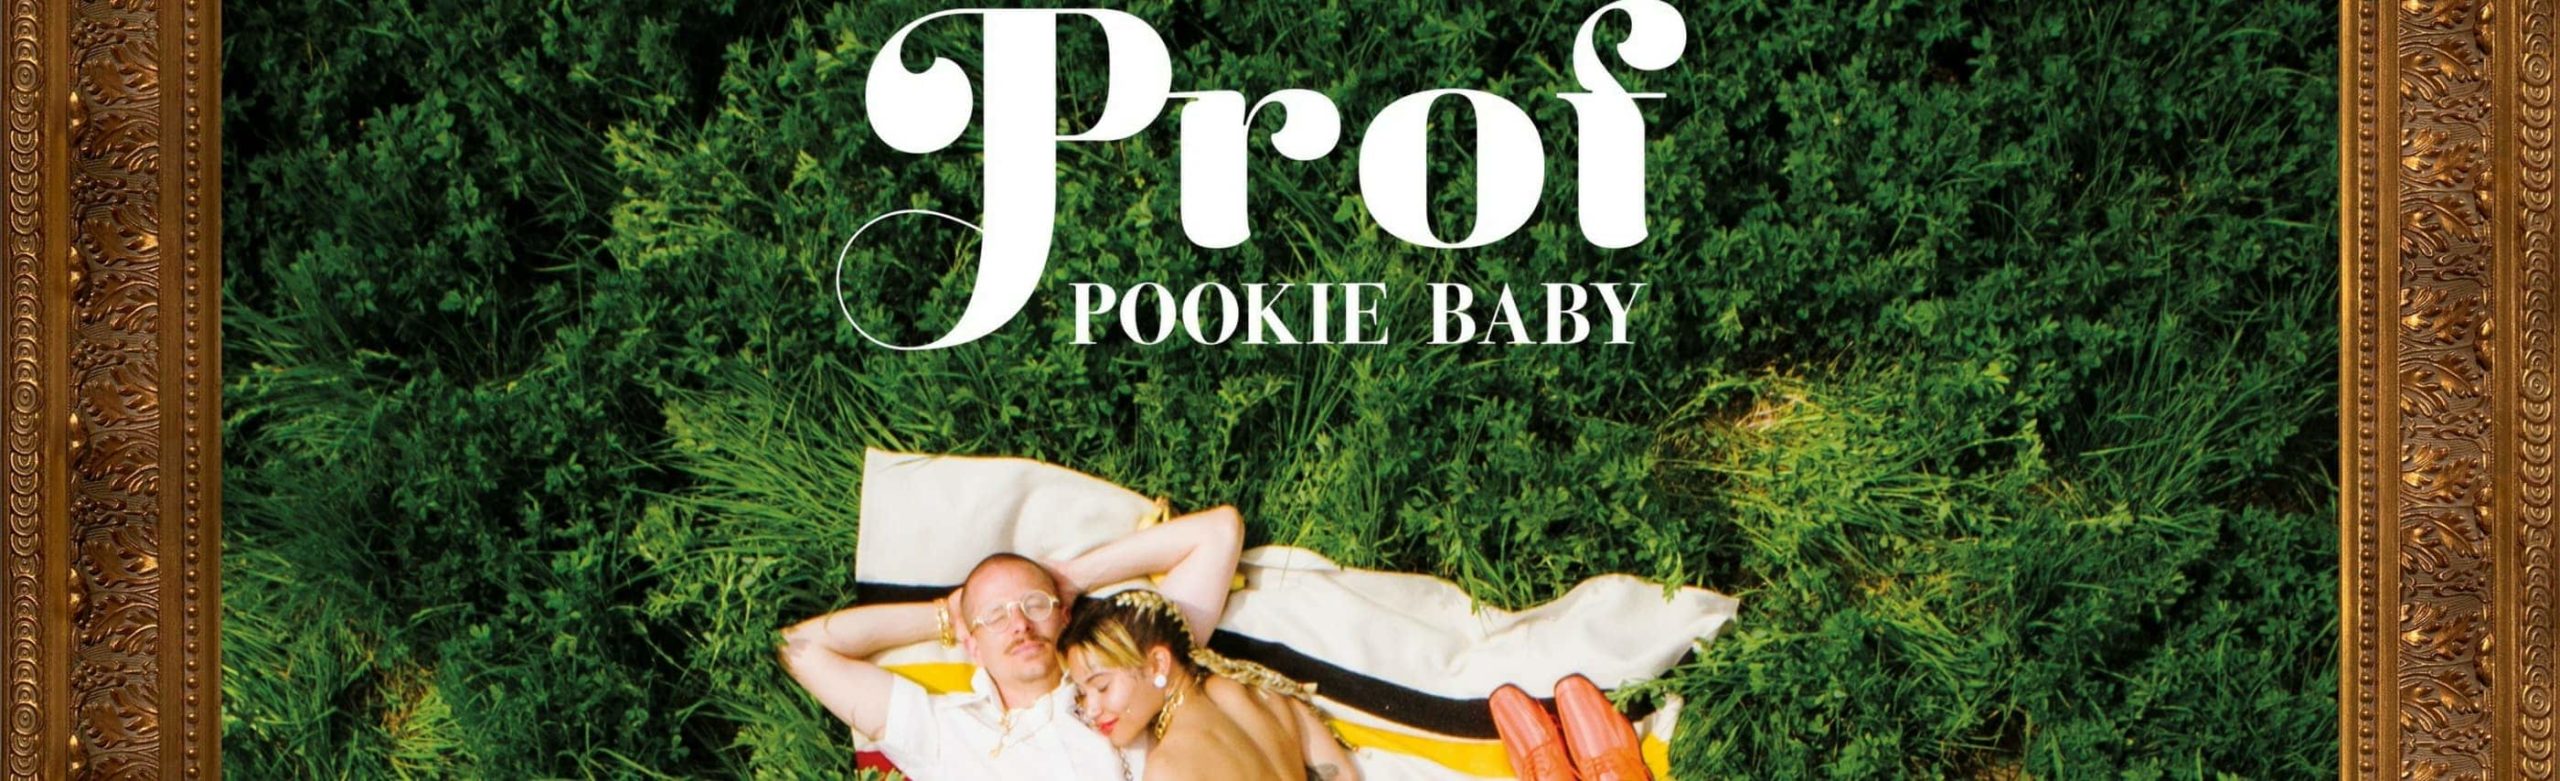 GIVEAWAY: Prof Tickets and a “Pookie Baby” Vinyl Image